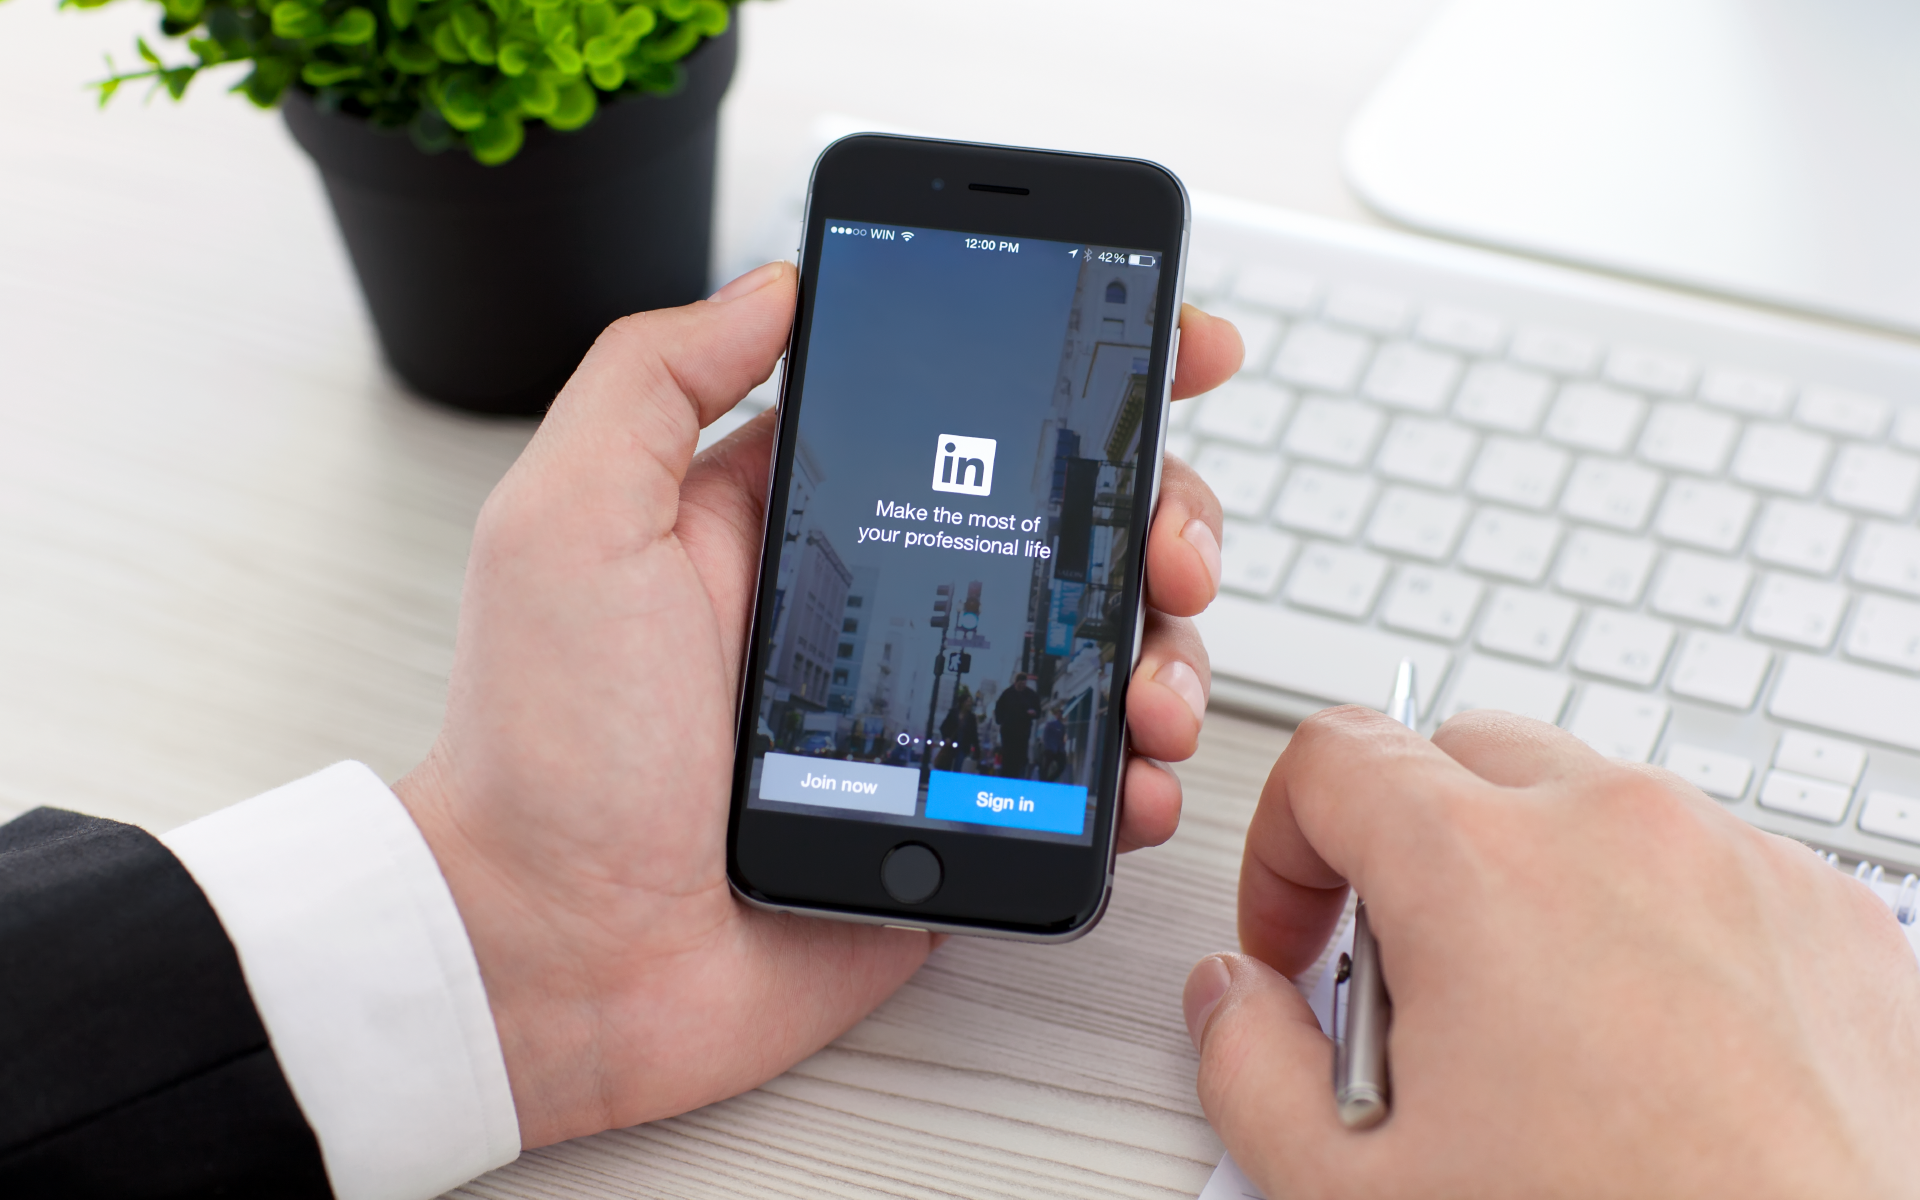 LinkedIn Launches Mobile Lead Generation Ads With In App Contact Forms